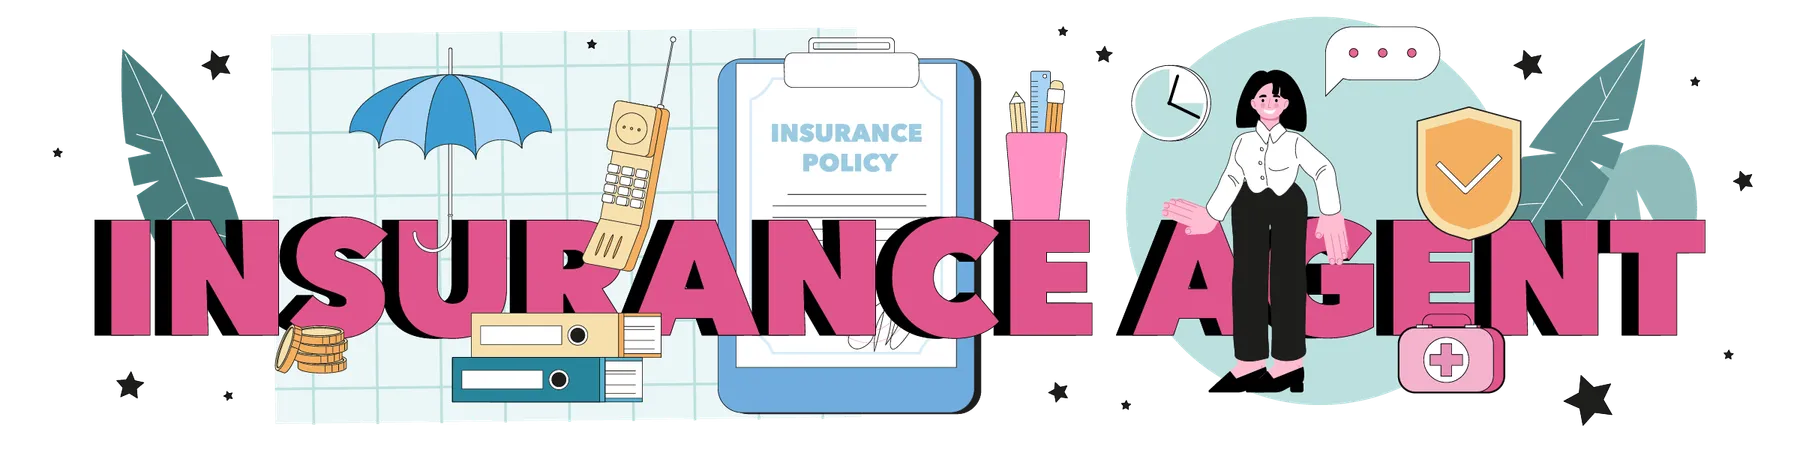 Insurance Agent Typographic Header Contract Of Security Of Property And Life From Potential Damage Healthcare And Medical Service Expences Reimbursement Flat Vector Illustration Illustration